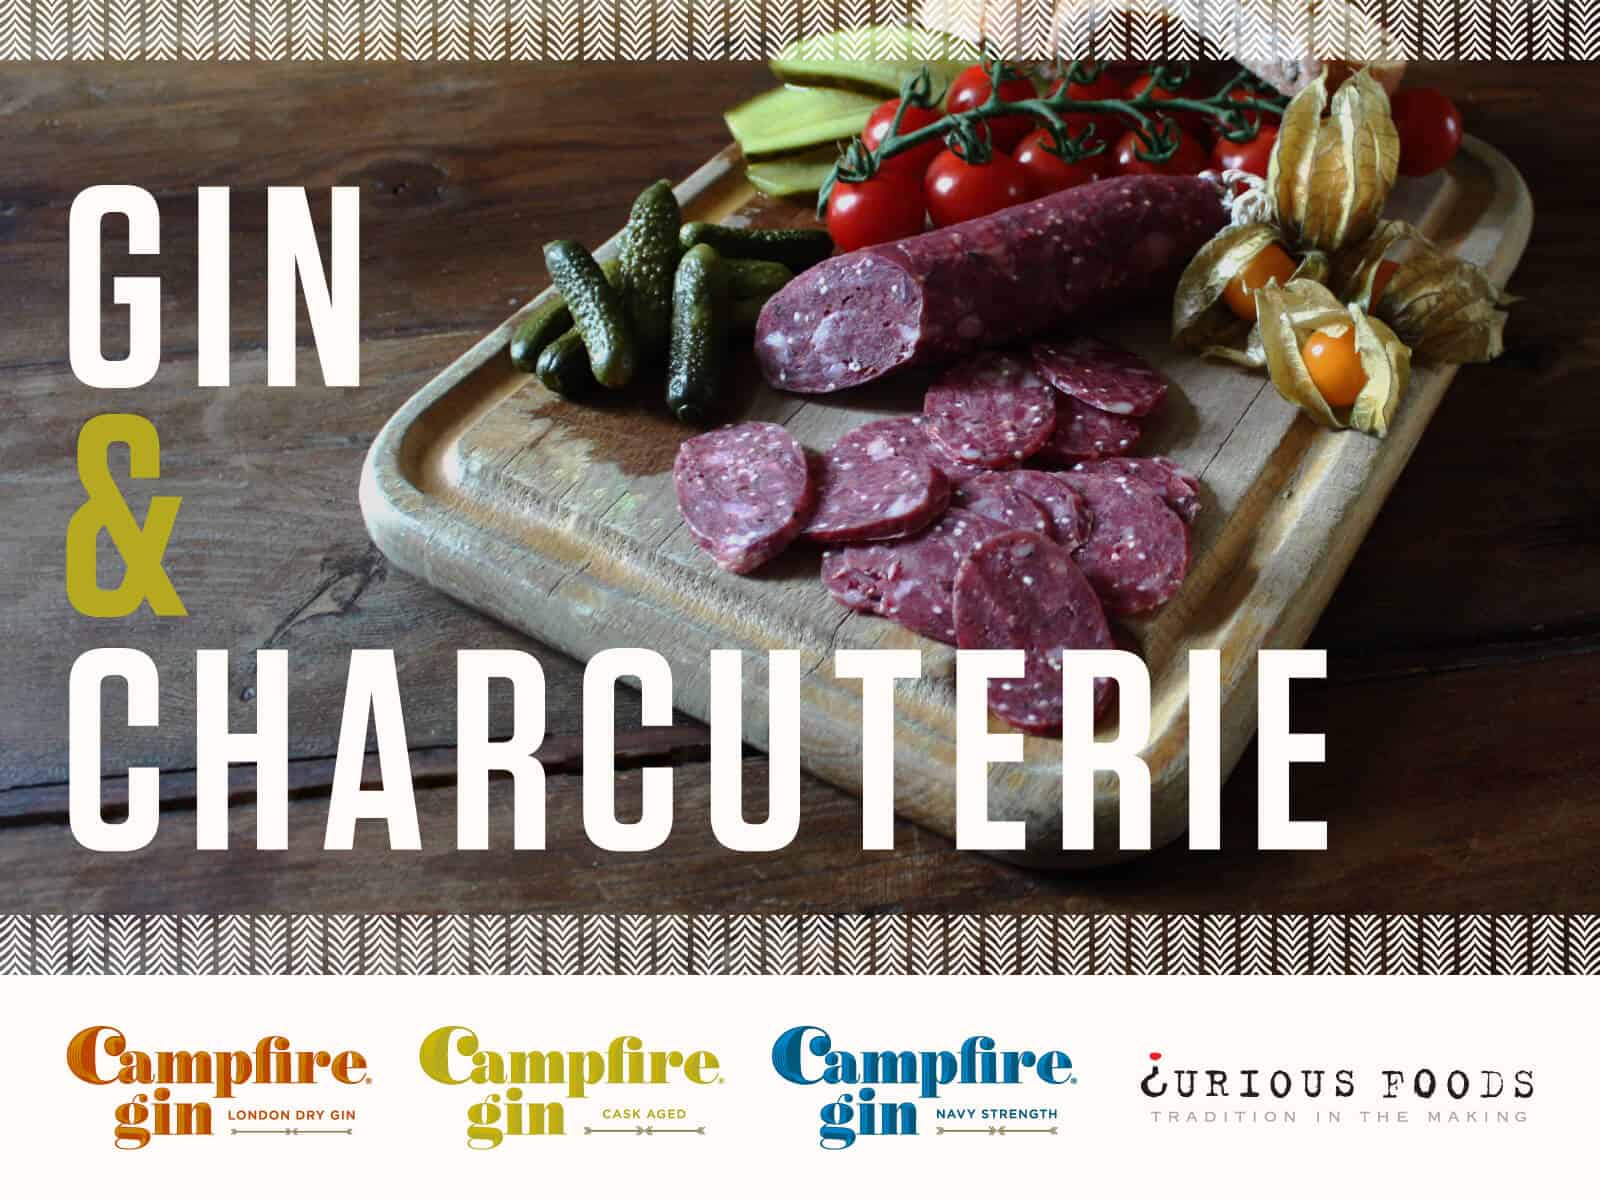 Campfire Gin & Curious Foods Charcuterie